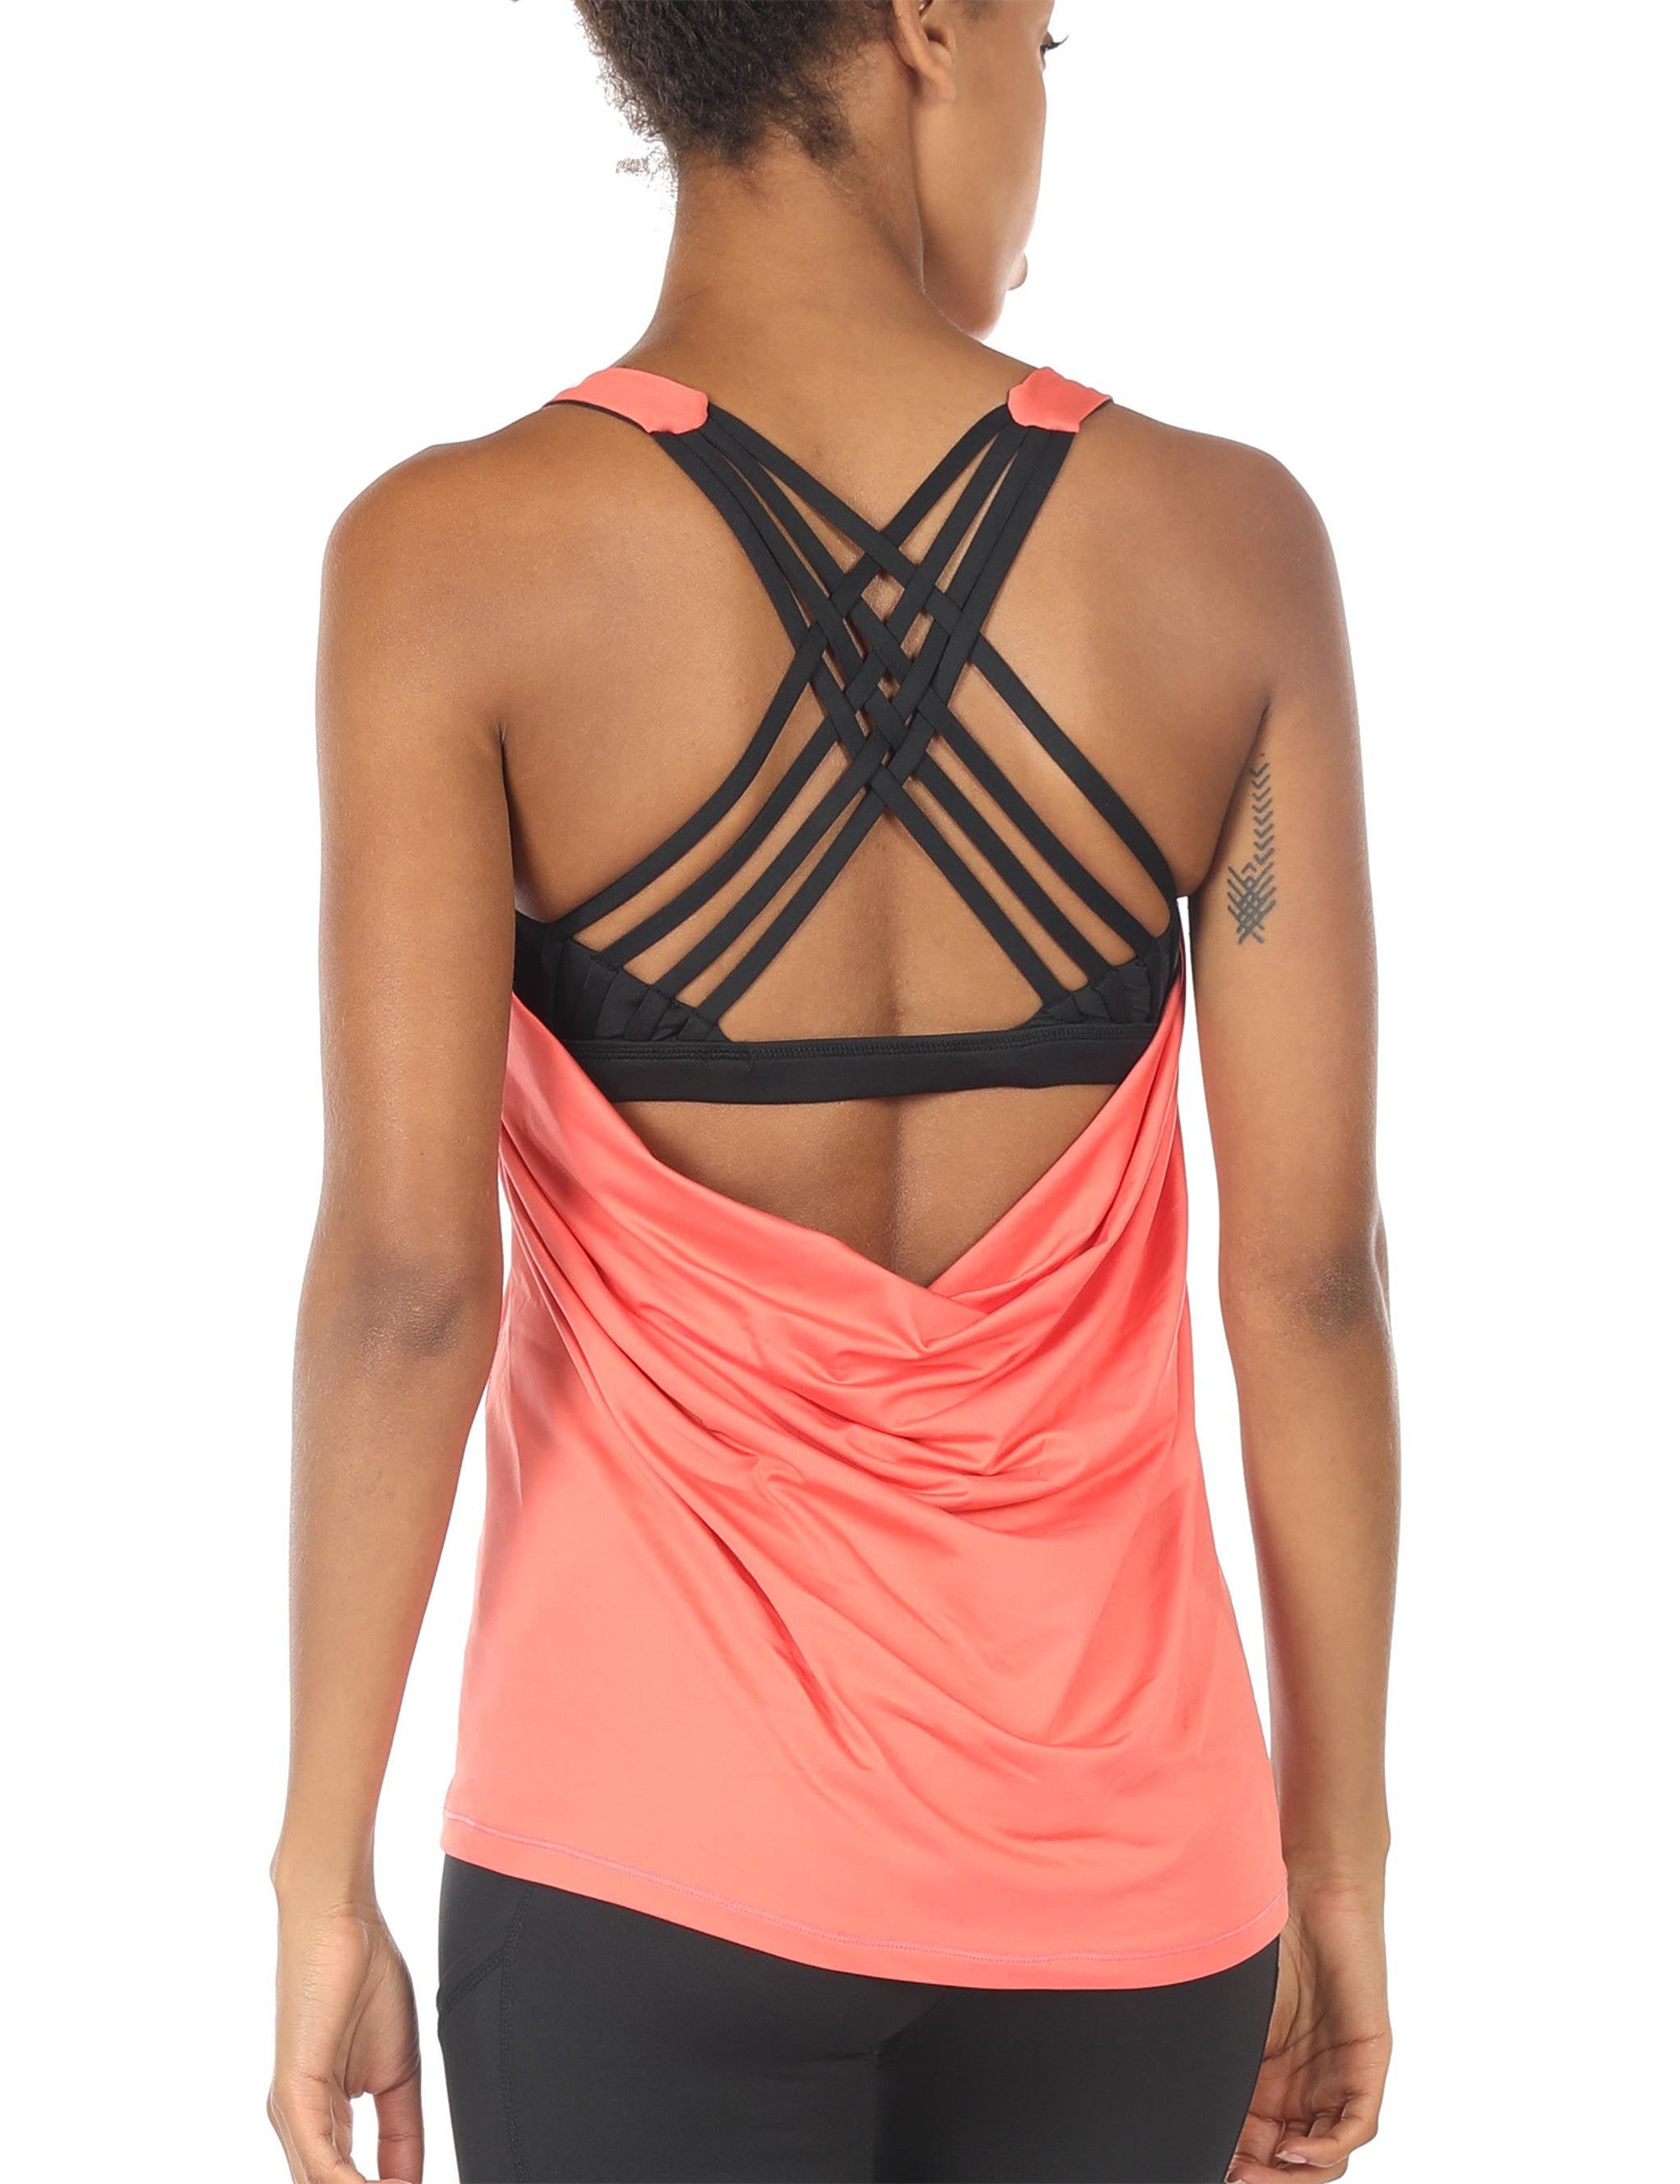 Women's Racerback Tank Tops with Built-in Bra for Workout and Yoga